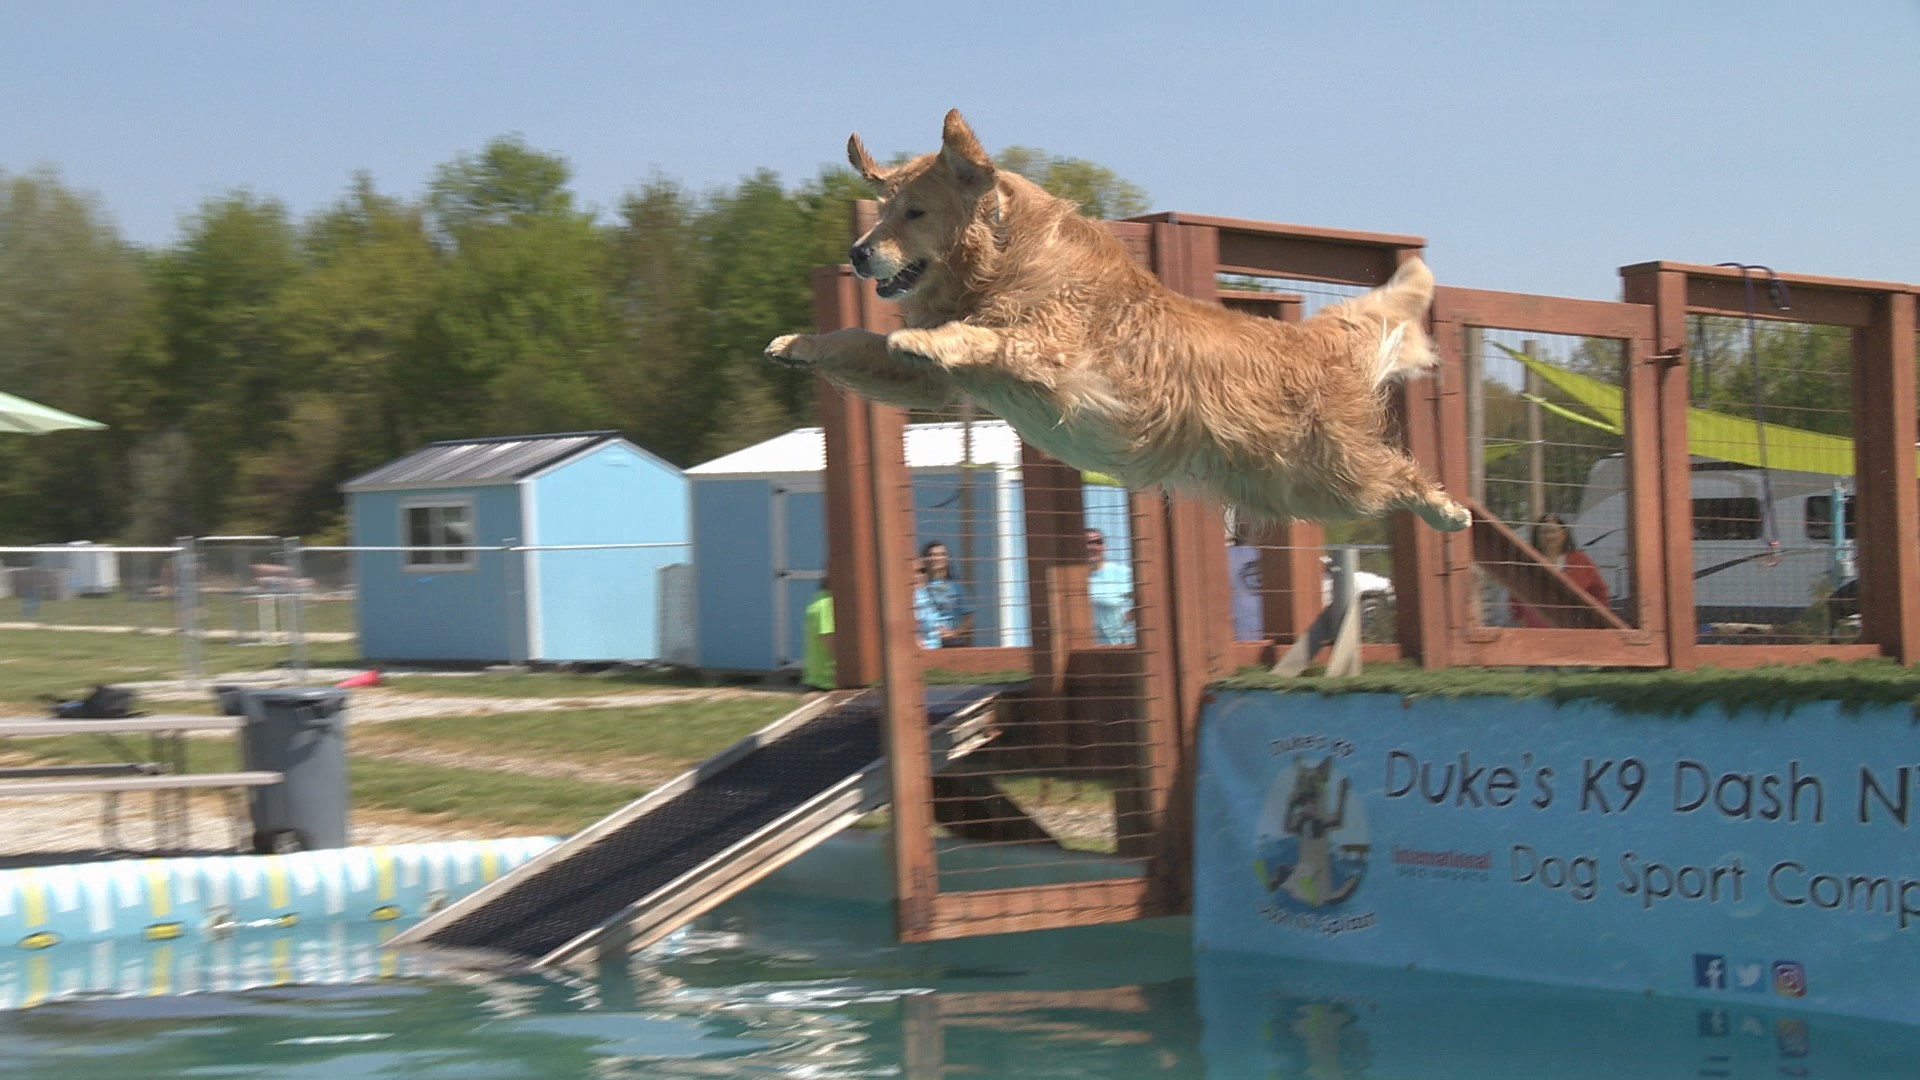 Once known for dock diving, the Portage County facility now offers many of the top sports for dogs.